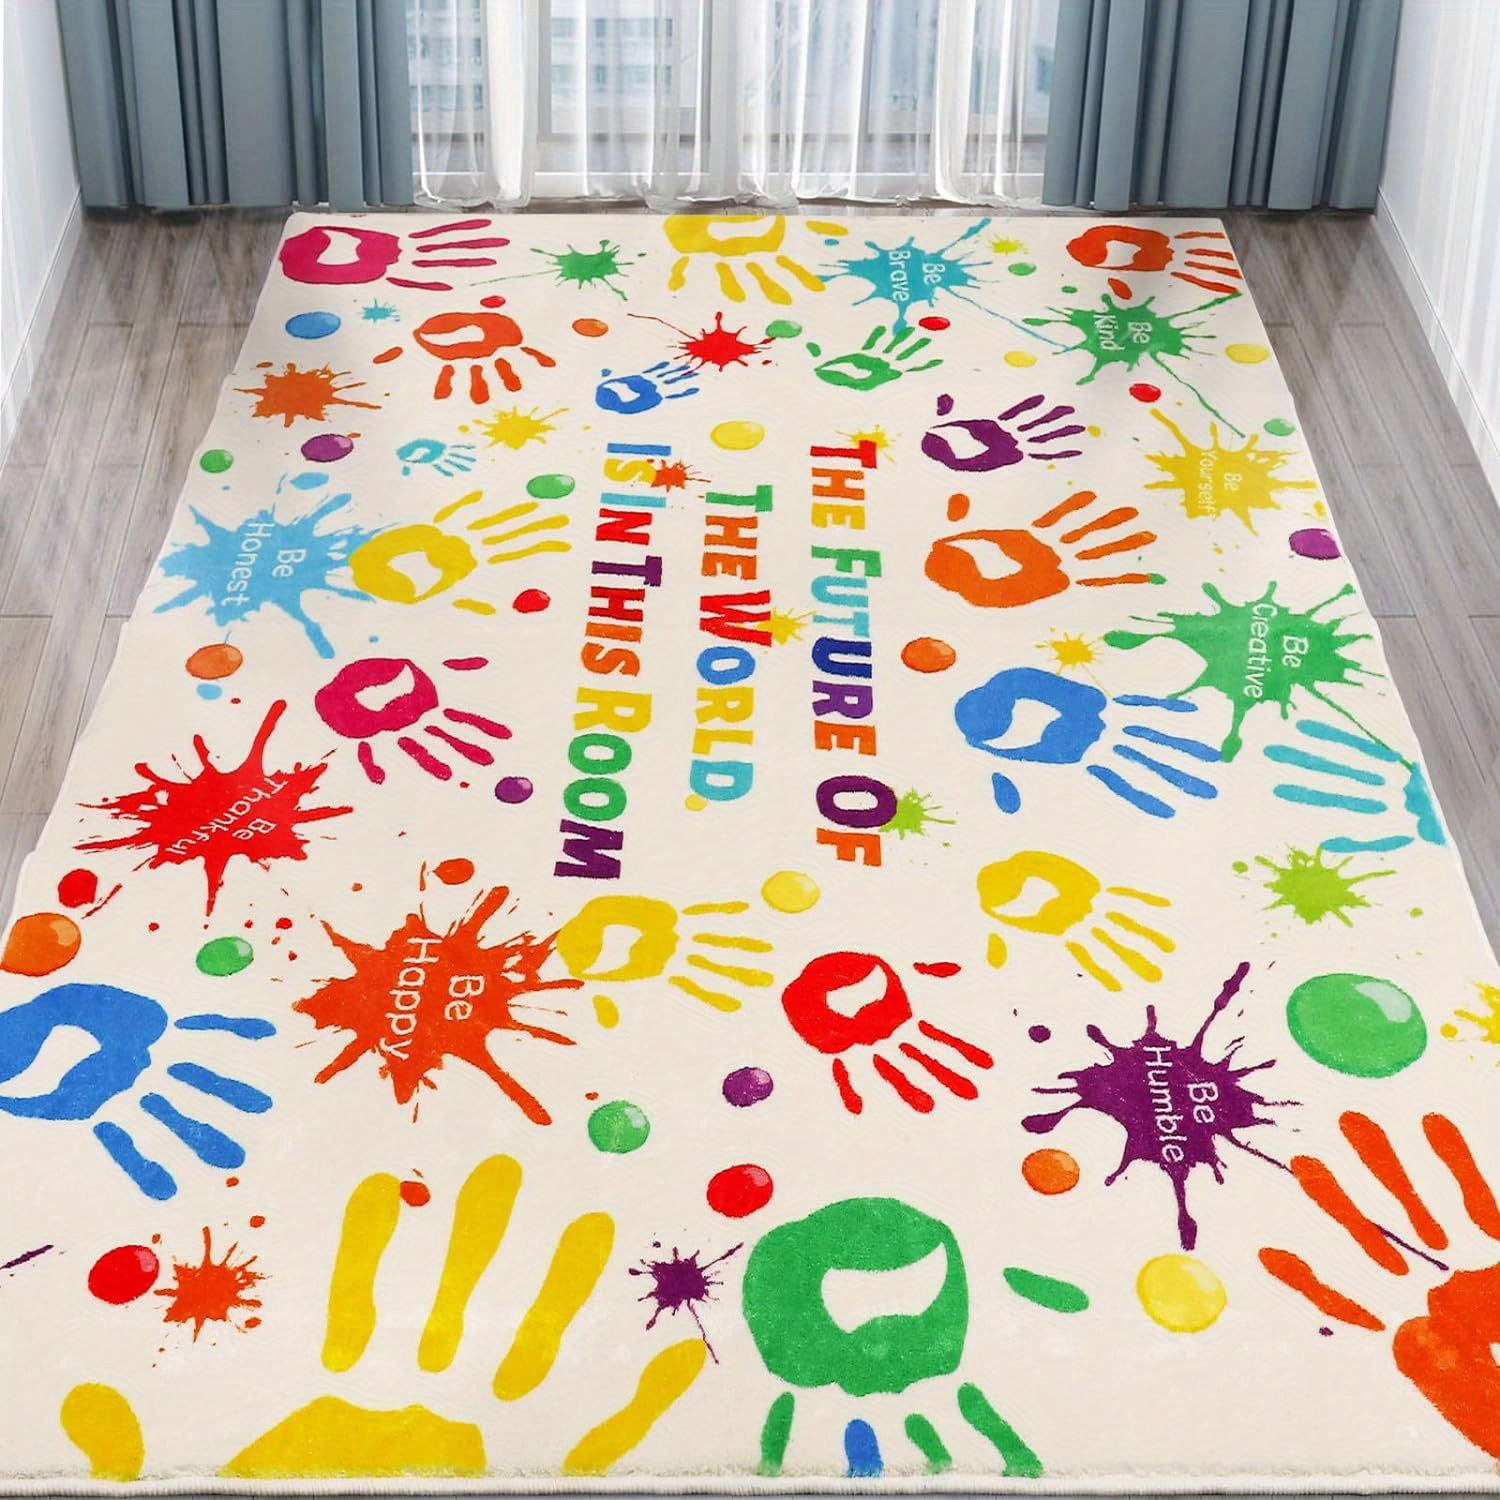 

Colorful Kids Rug, Washable Rug For Kids, Handprints Area Rugs For Kids Bedroom, Non-slip Play Mat Ultra Soft Thick Indoor Plush Rugs For Playroom Classroom Nursery Decor (78.7 X 59 Inch)